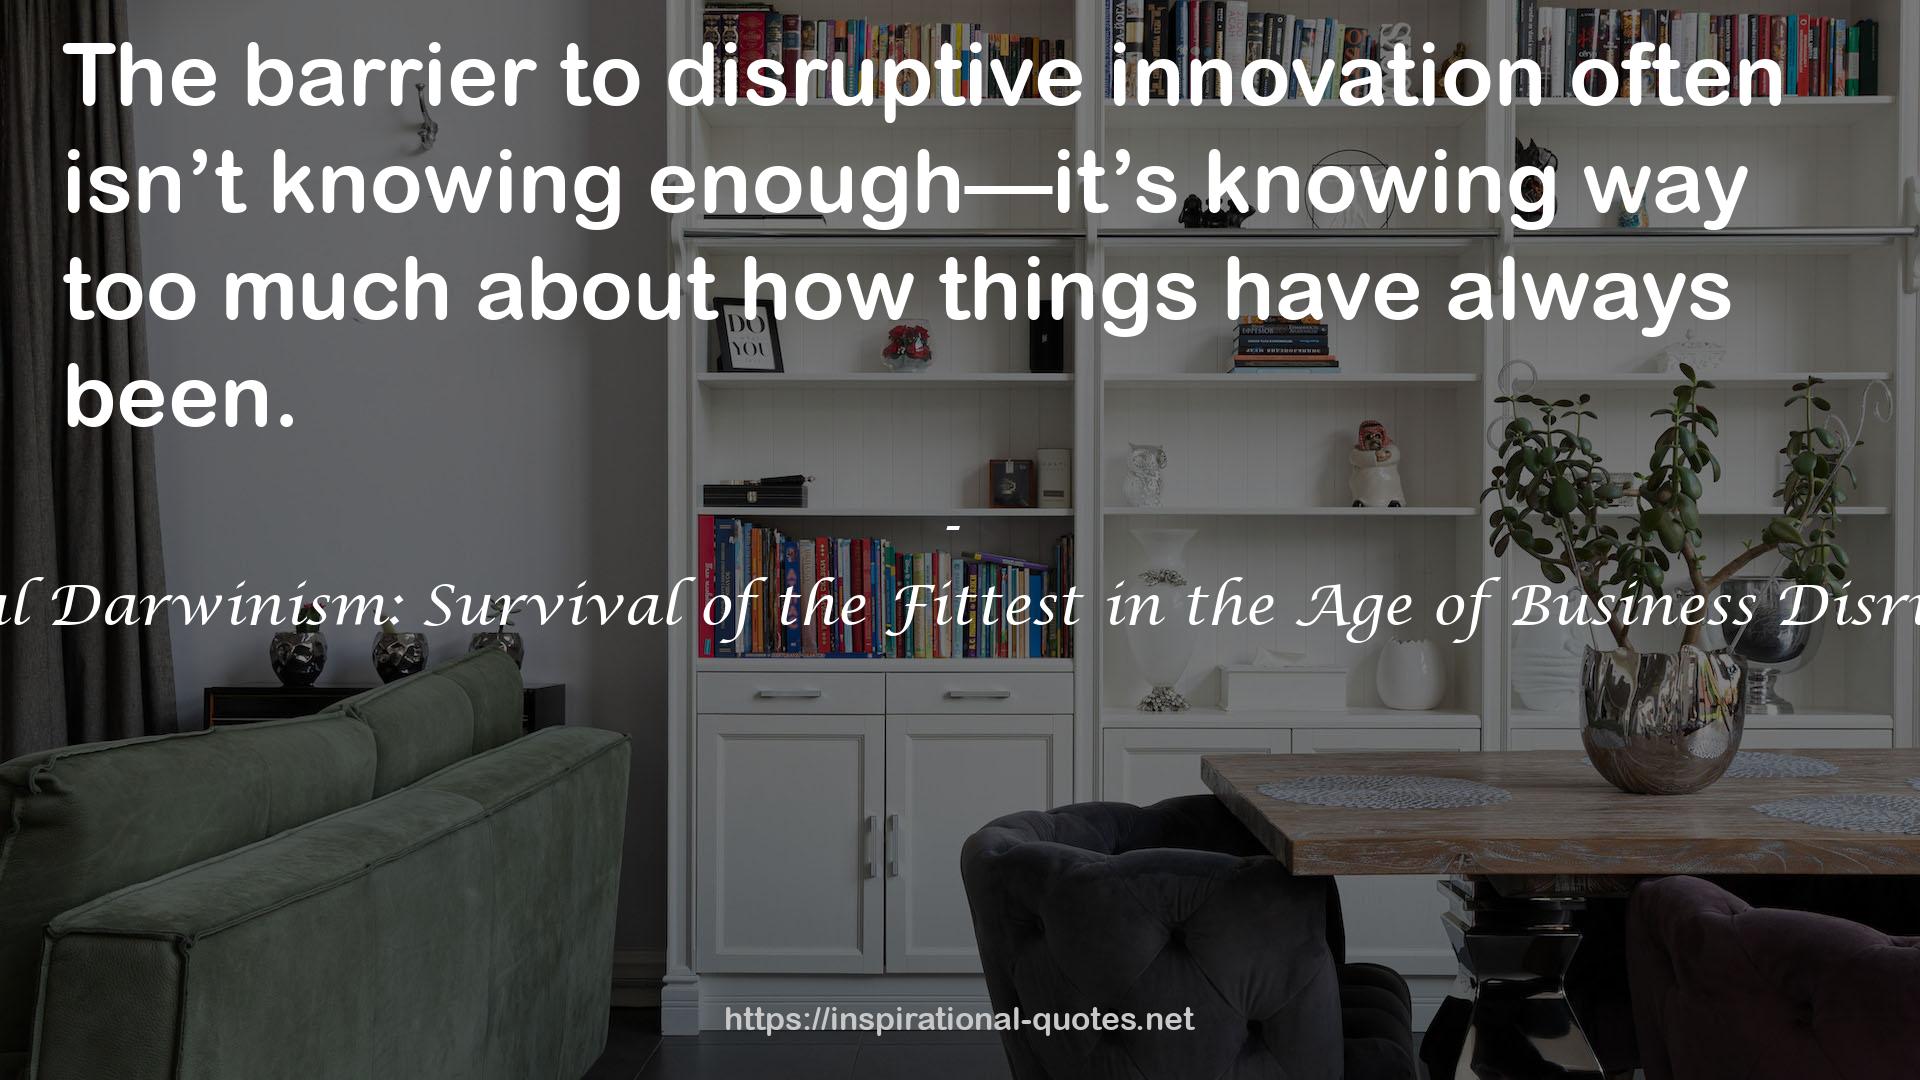 Digital Darwinism: Survival of the Fittest in the Age of Business Disruption QUOTES